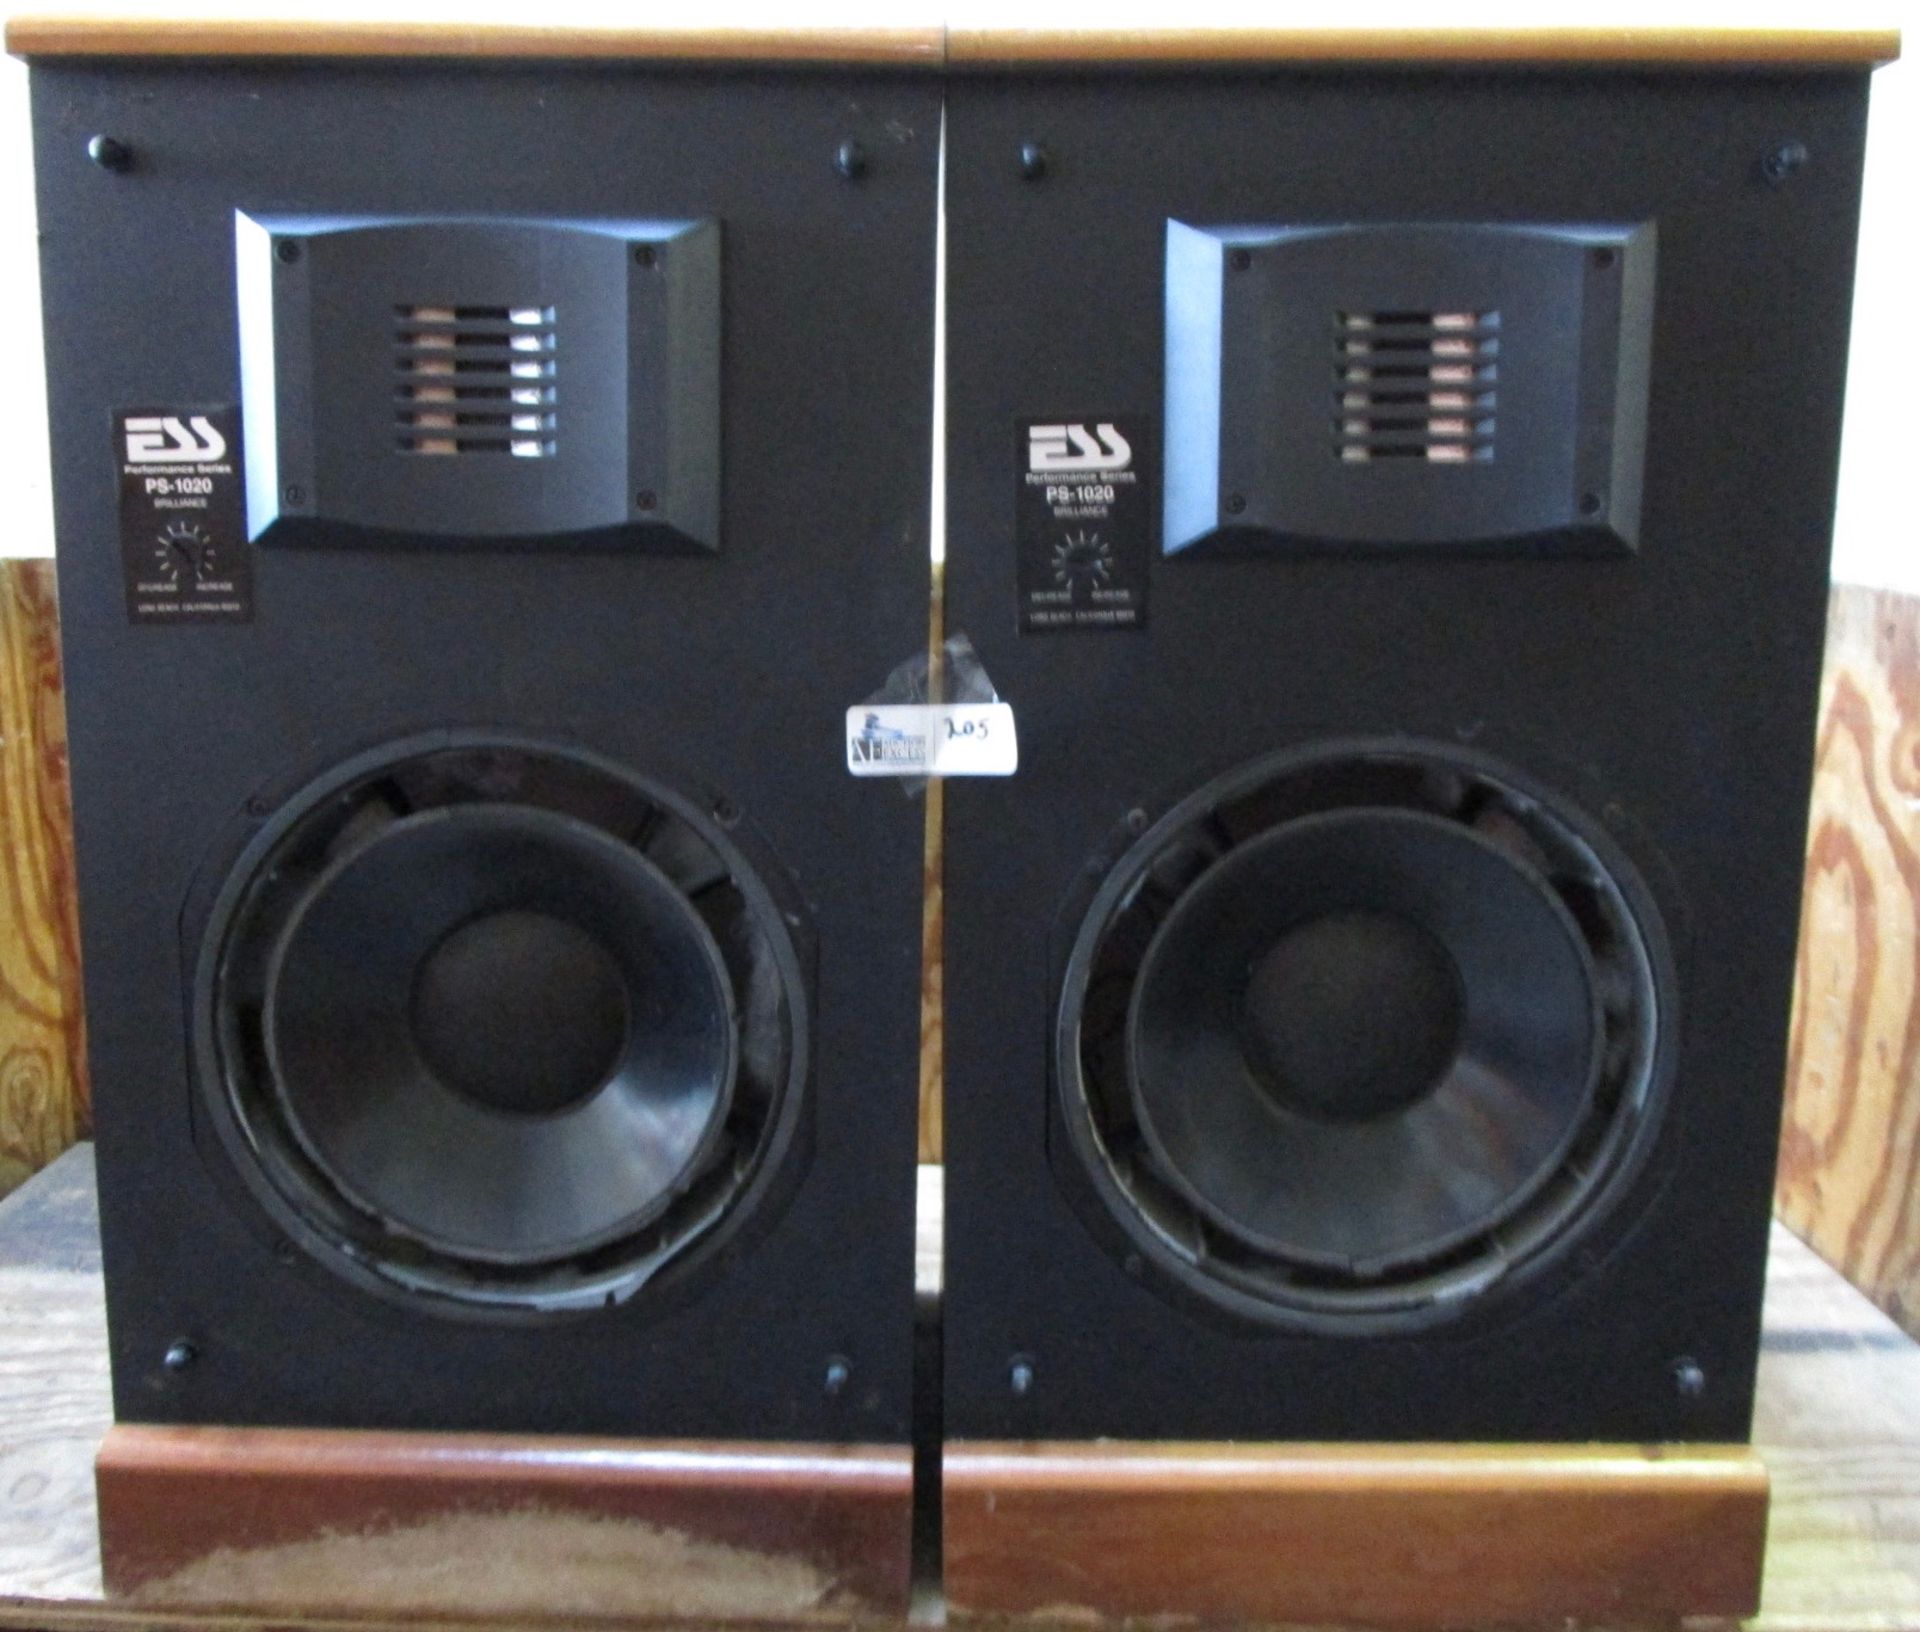 LOT OF 2 ESS PS1020 BRILLIANCE SPEAKERS - Image 2 of 4